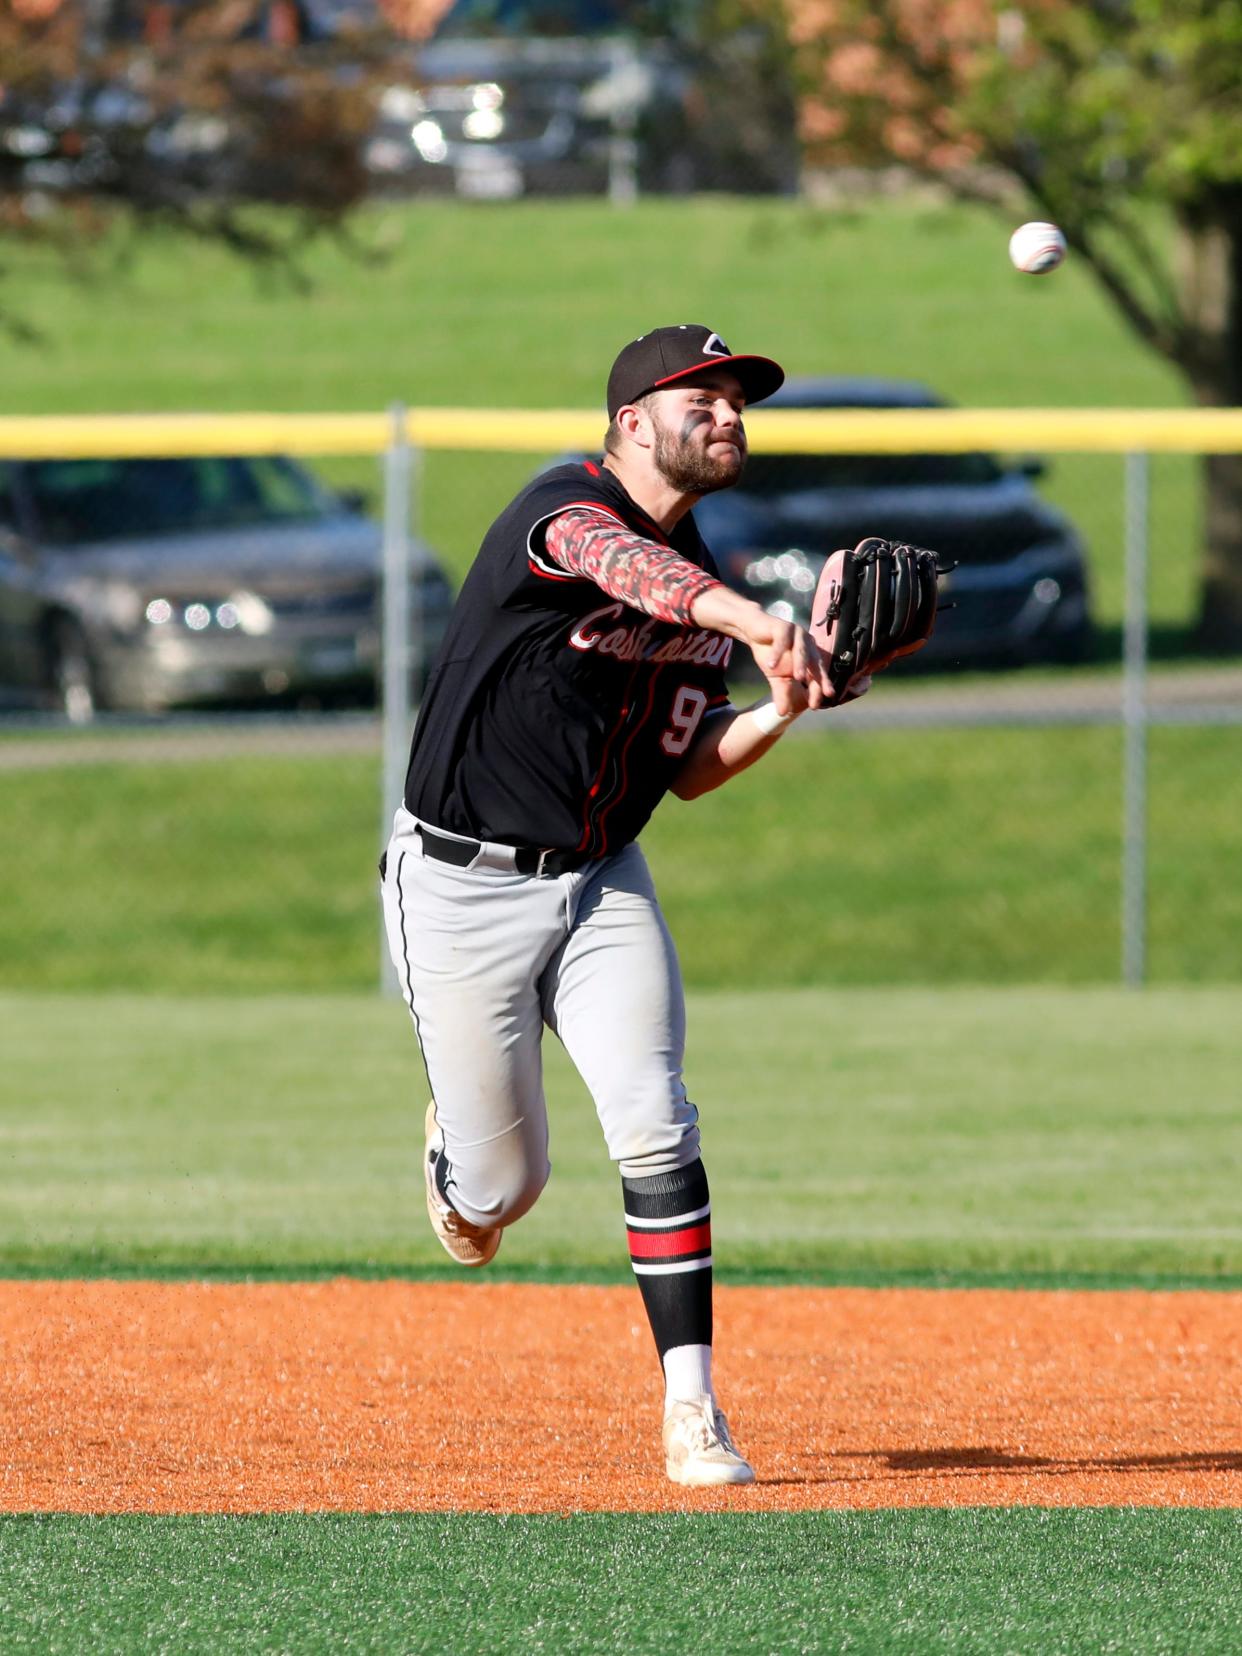 Senior Coby Moore throws out a runner at first base during Coshocton's 6-1 loss against host Maysville on April 18 in Newton Township. Moore's squad earned a No. 14 seed in the Division III East District sectional tournament drawing on Sunday.